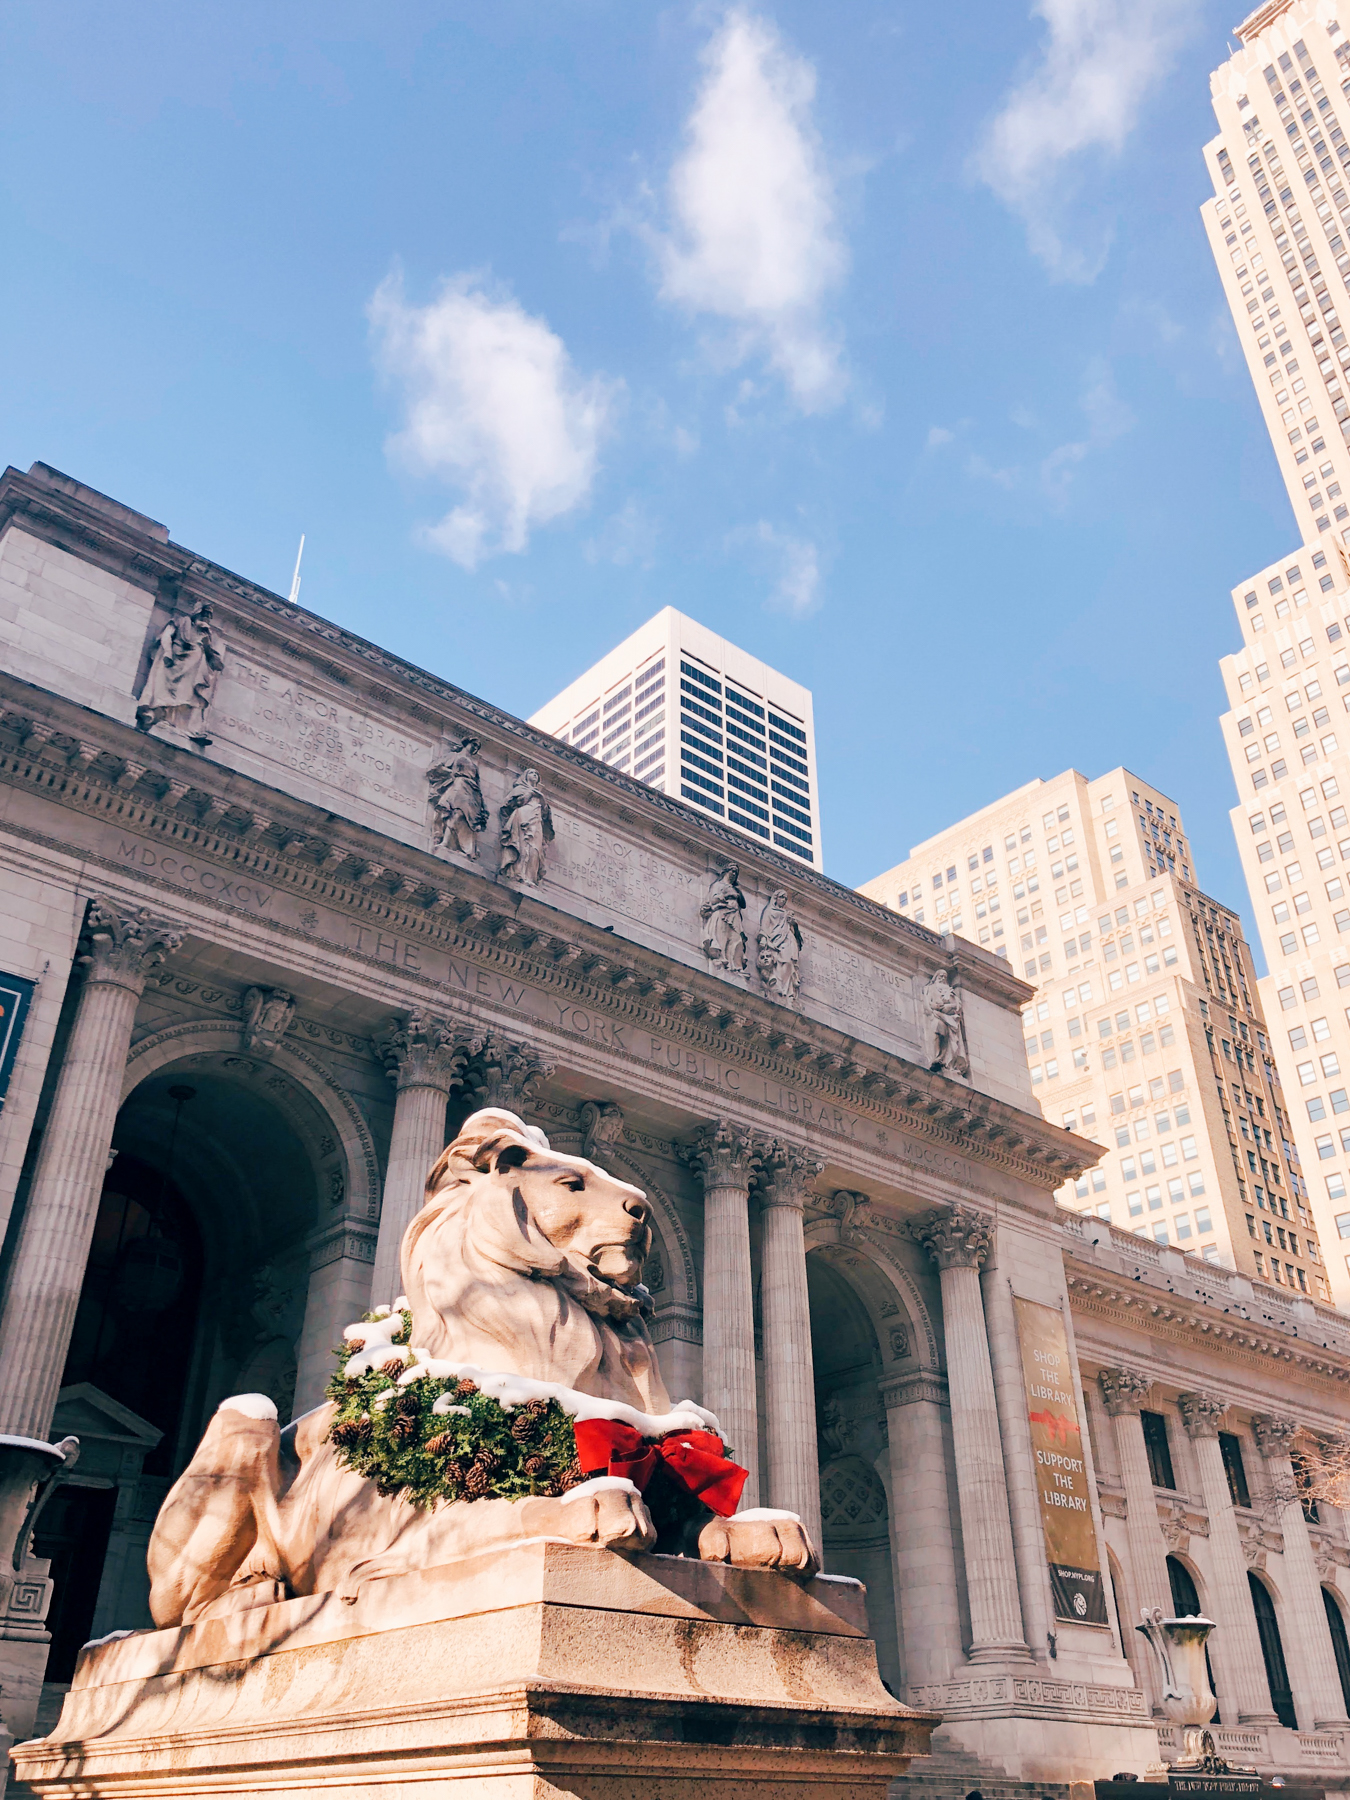 The famous lion statue outside of New York Public Library